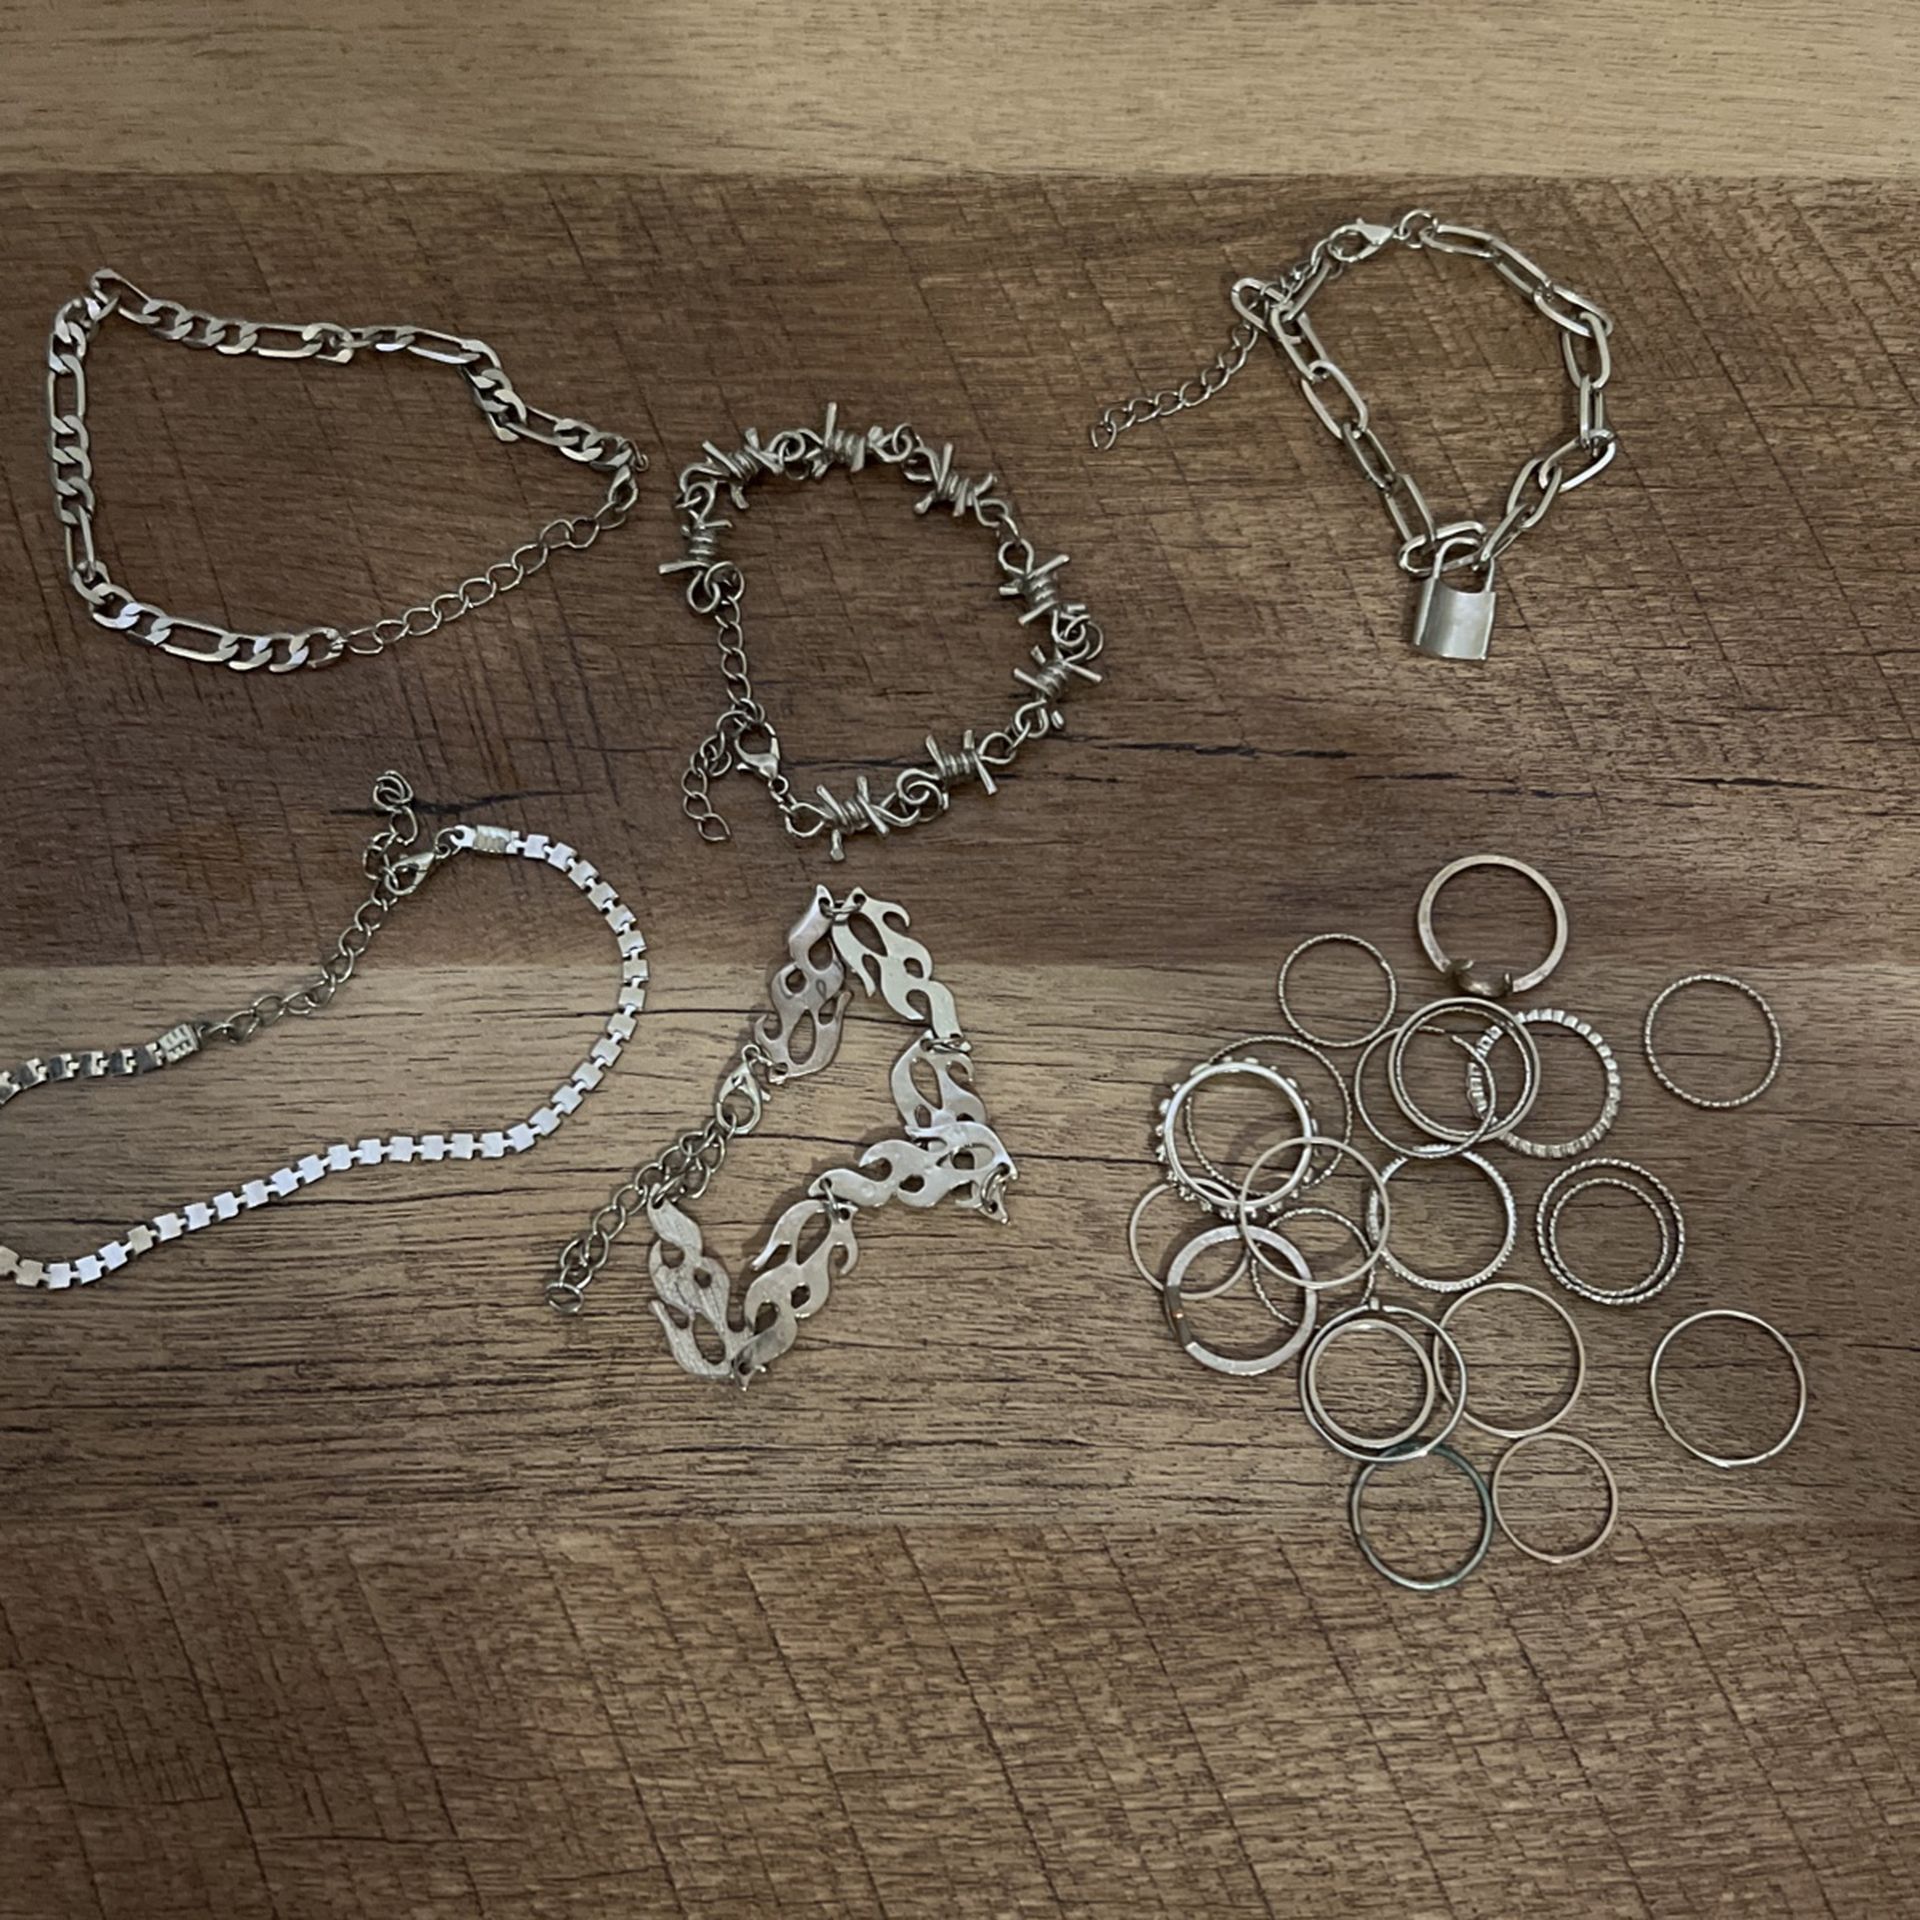 Silver Rings, Braclets, and Anklets